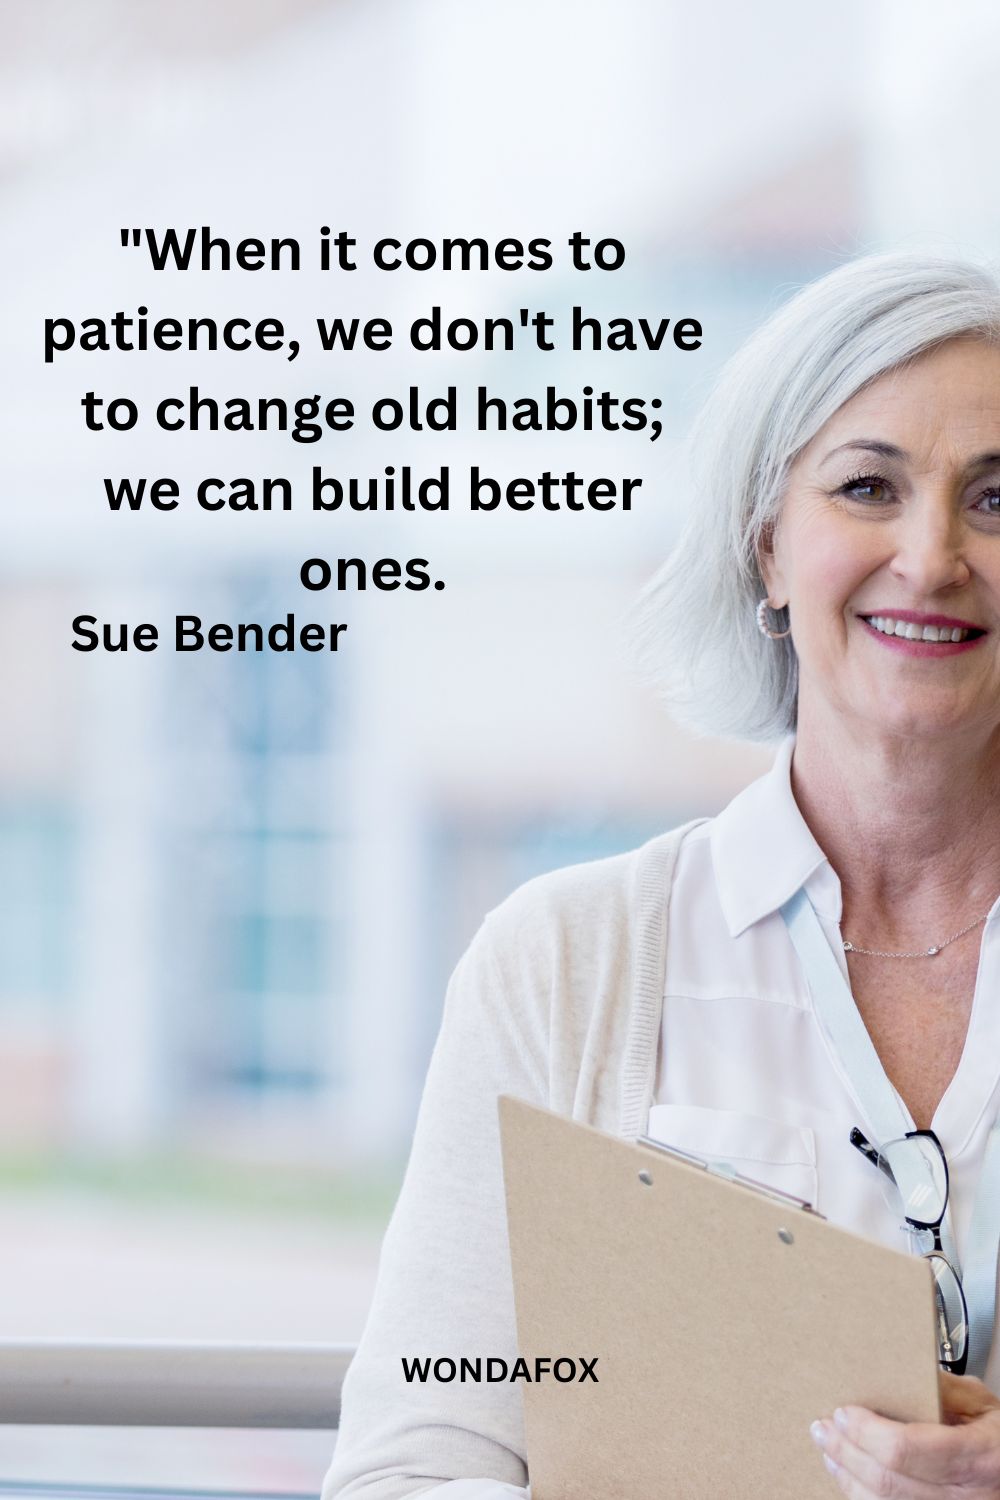 "When it comes to patience, we don't have to change old habits; we can build better ones.
Sue Bender